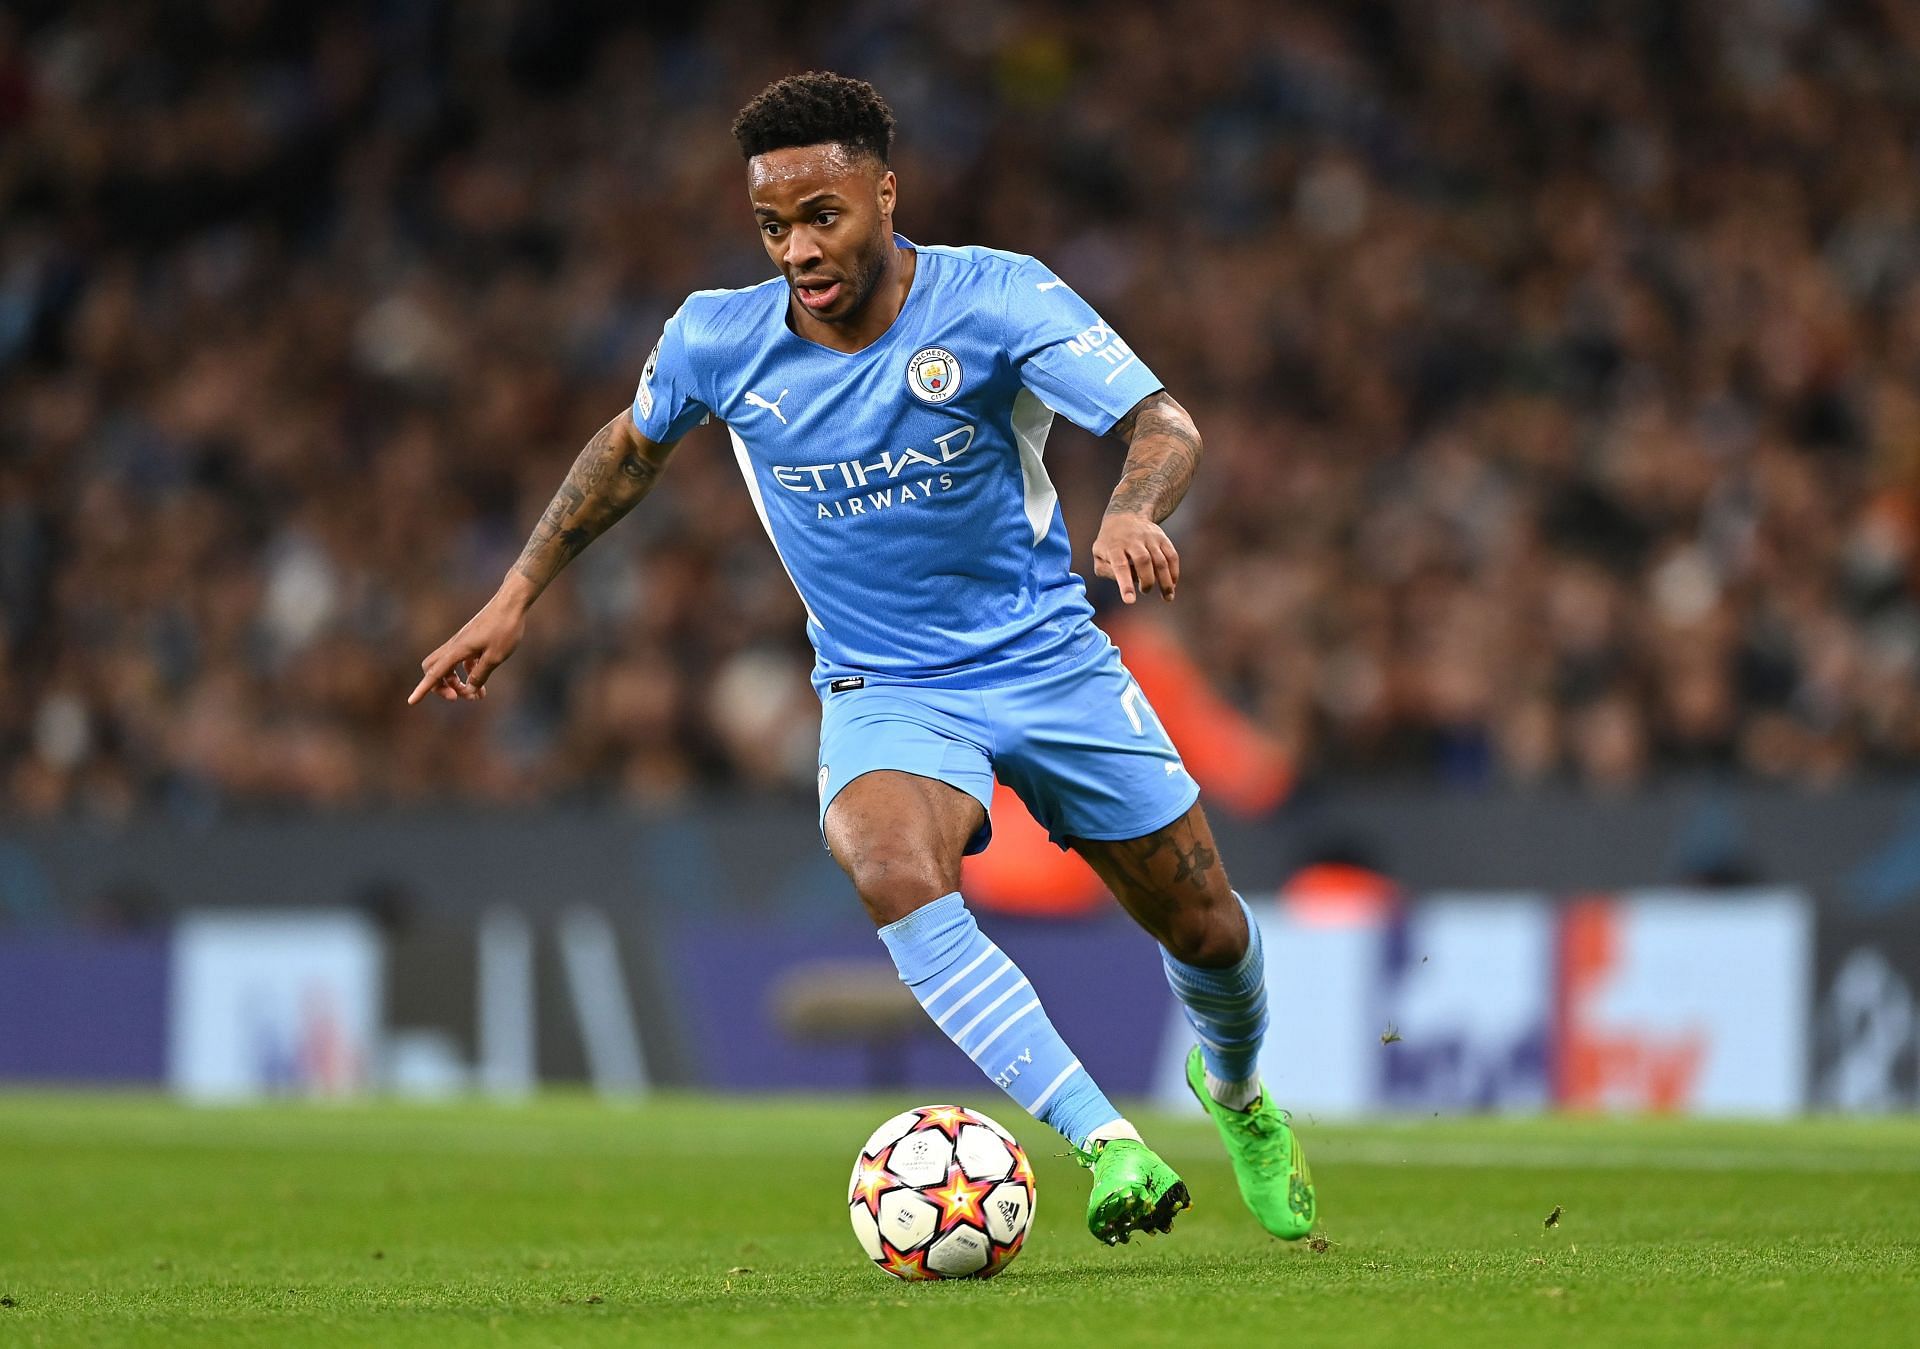 Sterling joined Manchester City from Liverpool in 2015